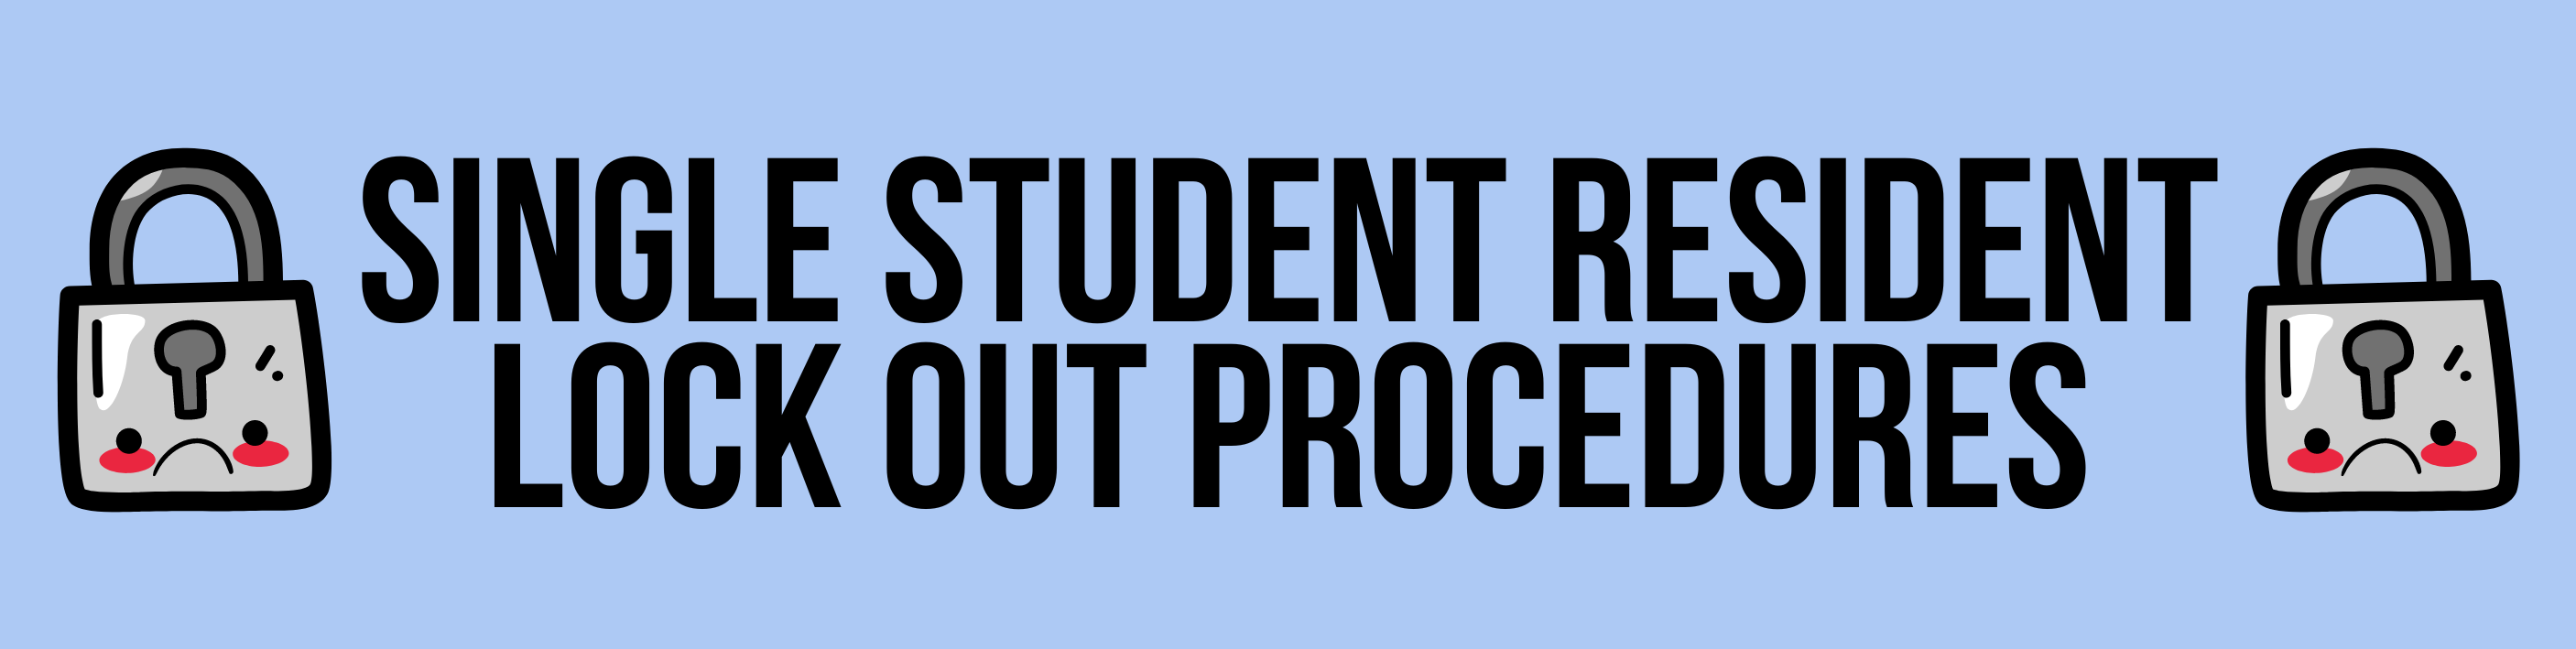 single student resident lock out procedures